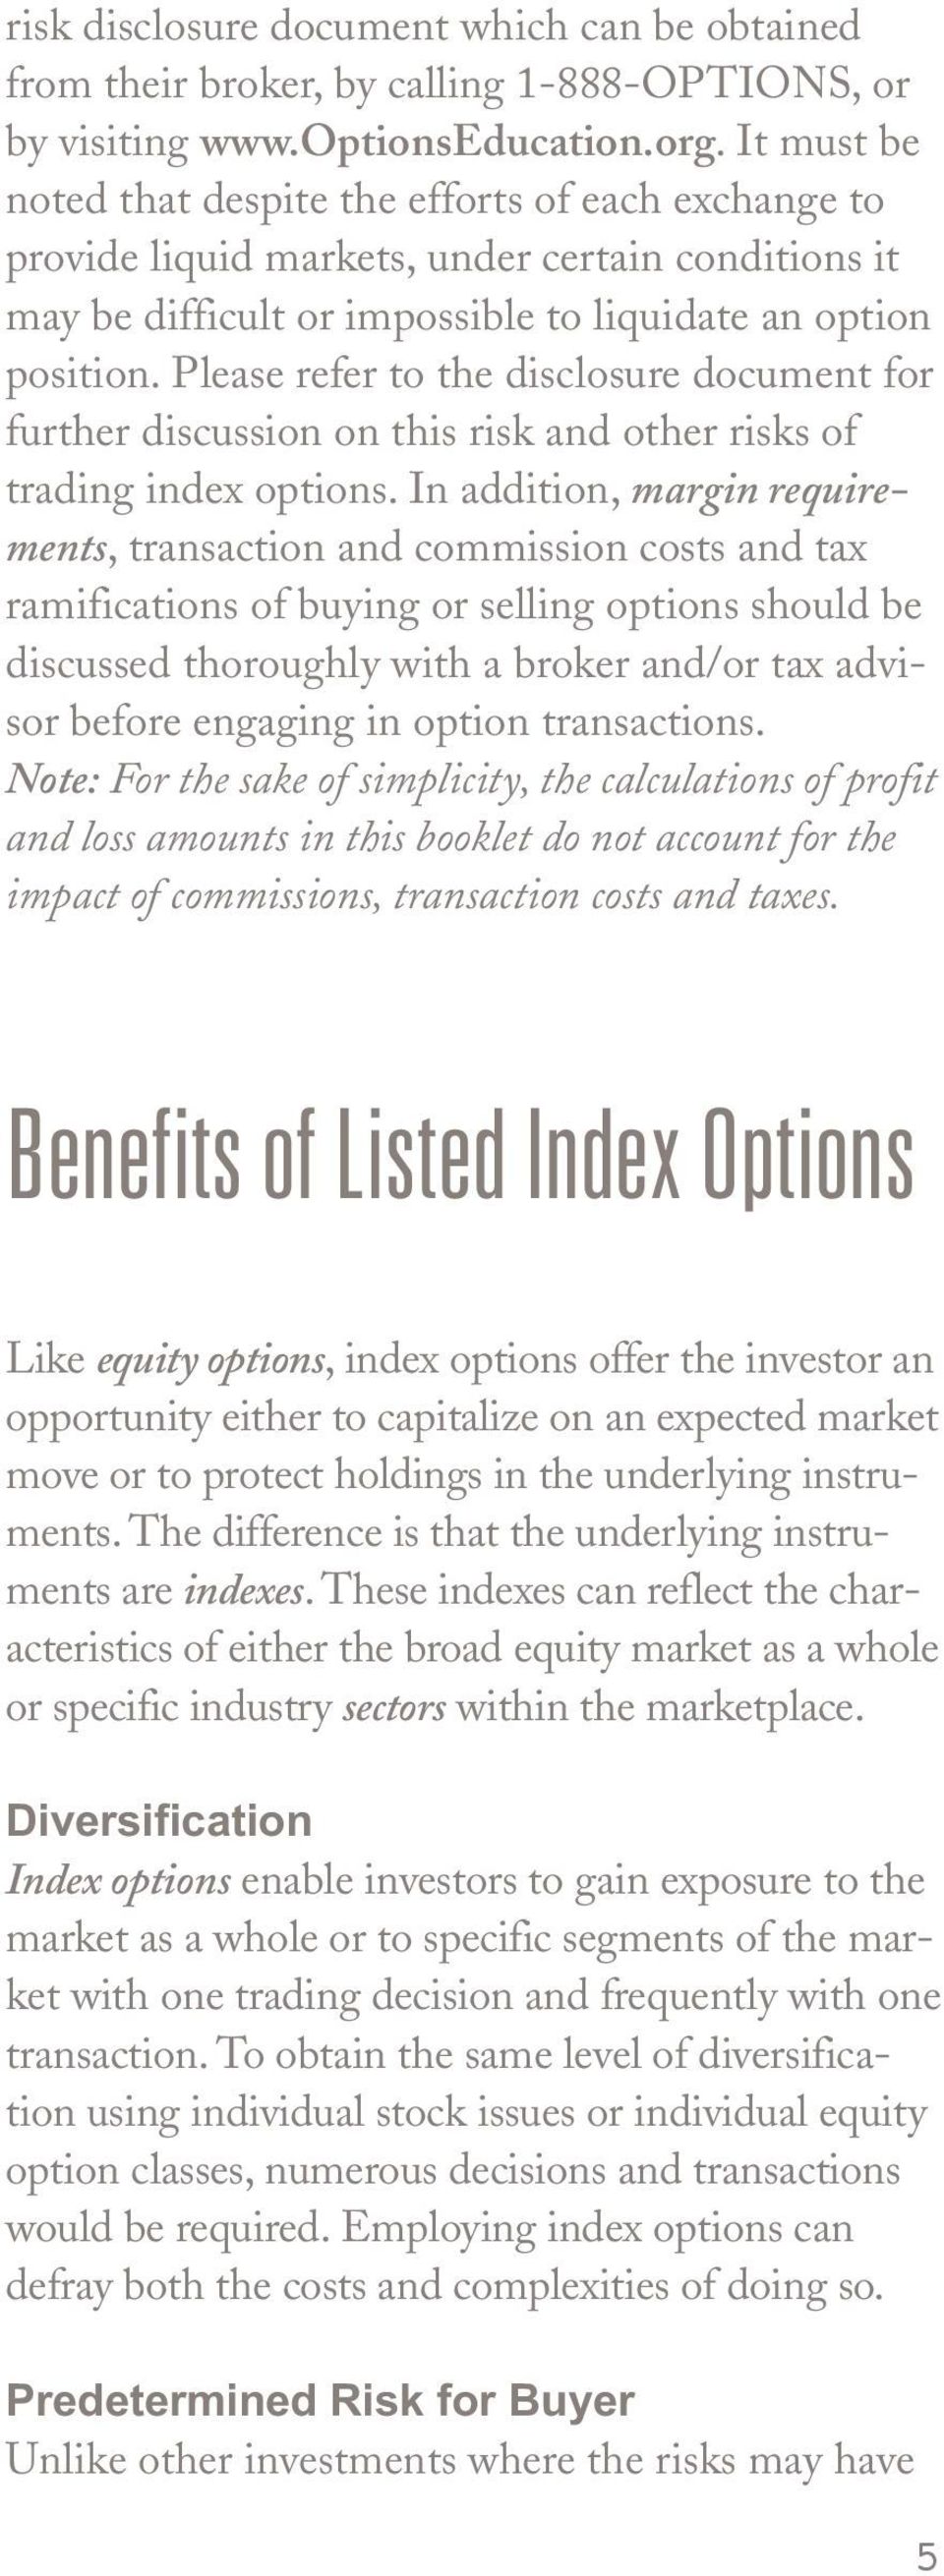 Please refer to the disclosure document for further discussion on this risk and other risks of trading index options.